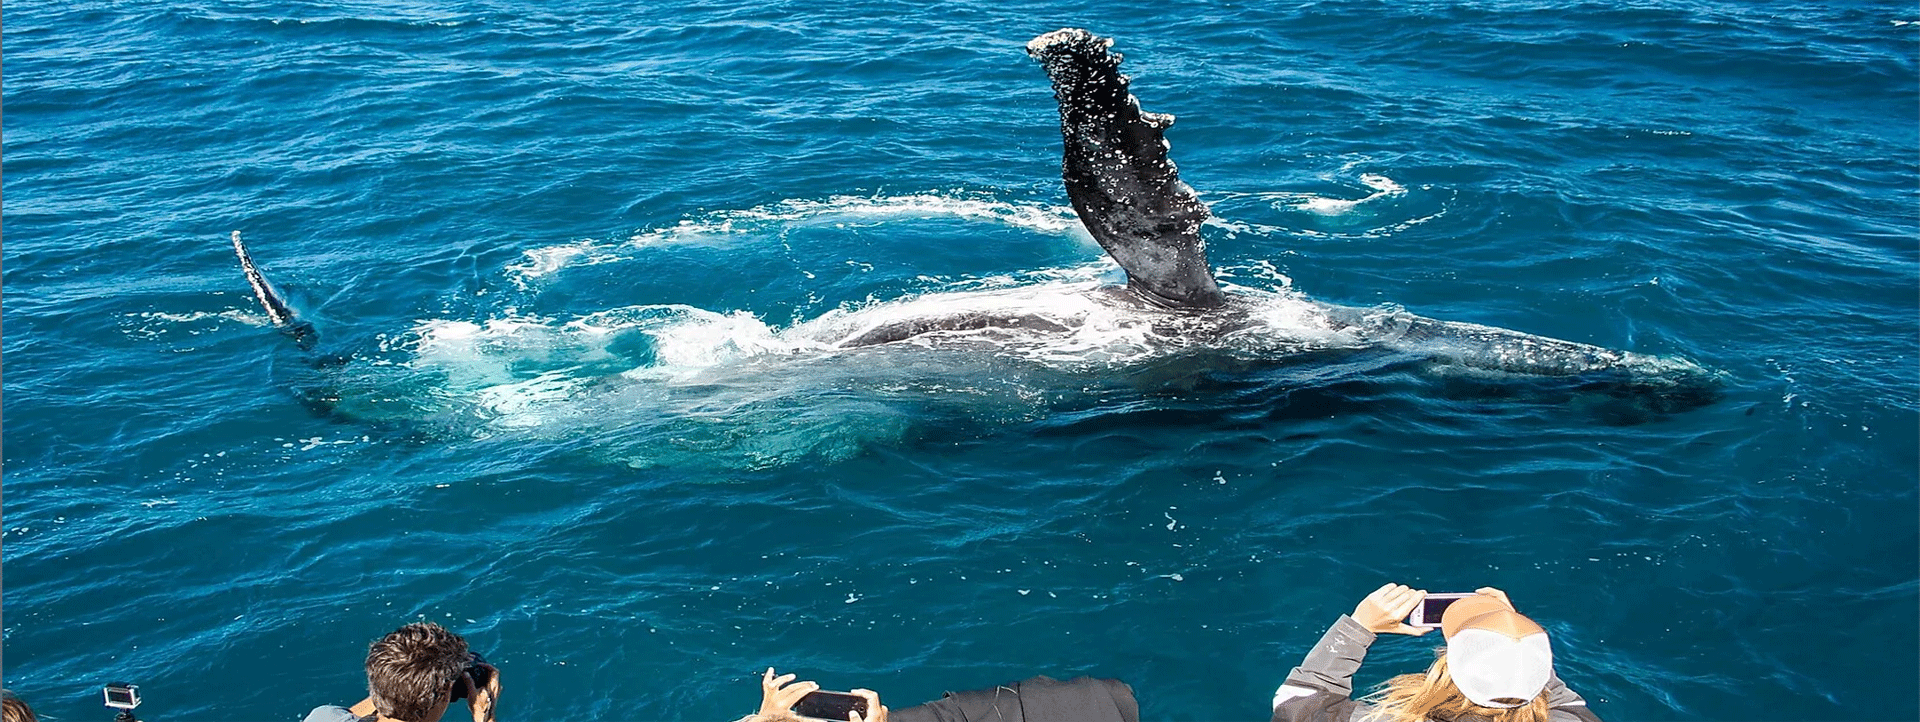 Swim-with-the-Whales-Latitude-22-whale-turning